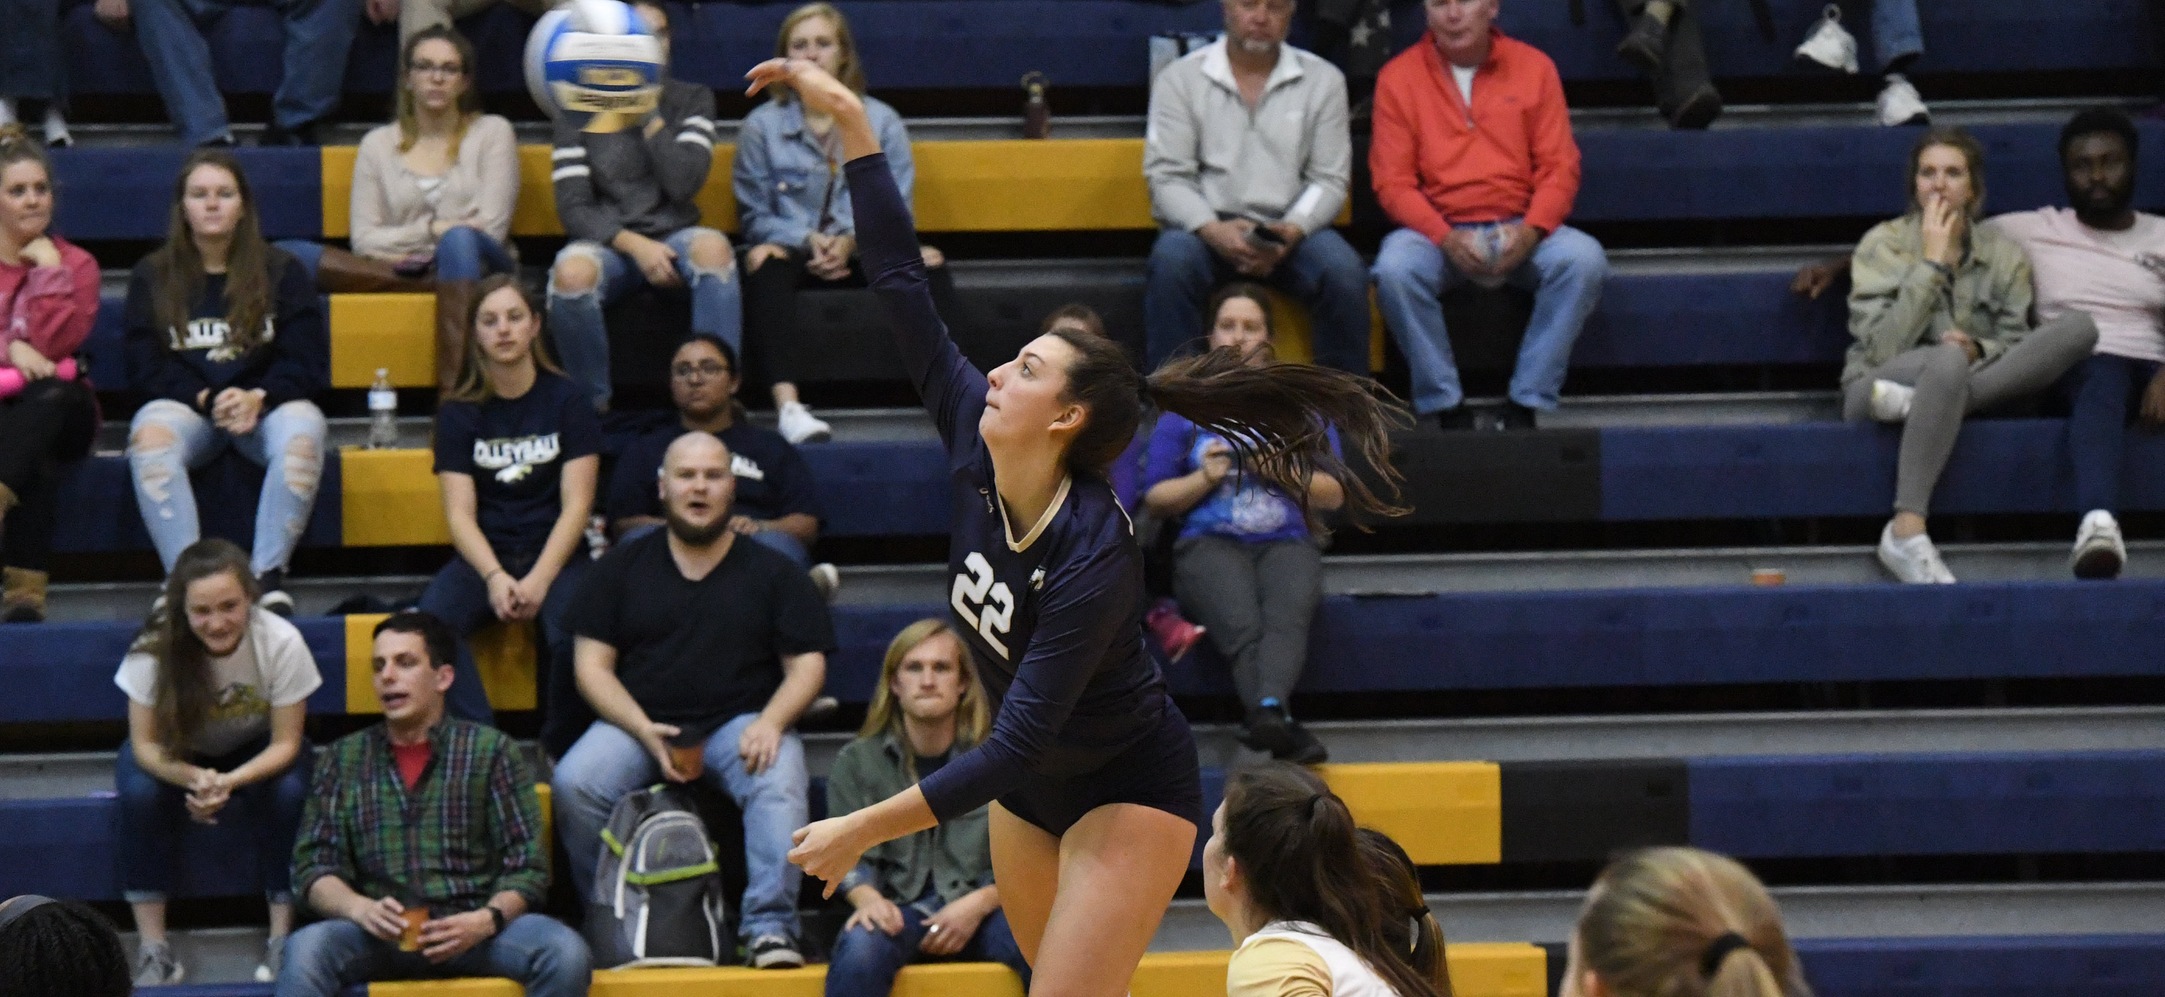 Women's Volleyball Sweeps Scranton to Finish Conference Play Unbeaten